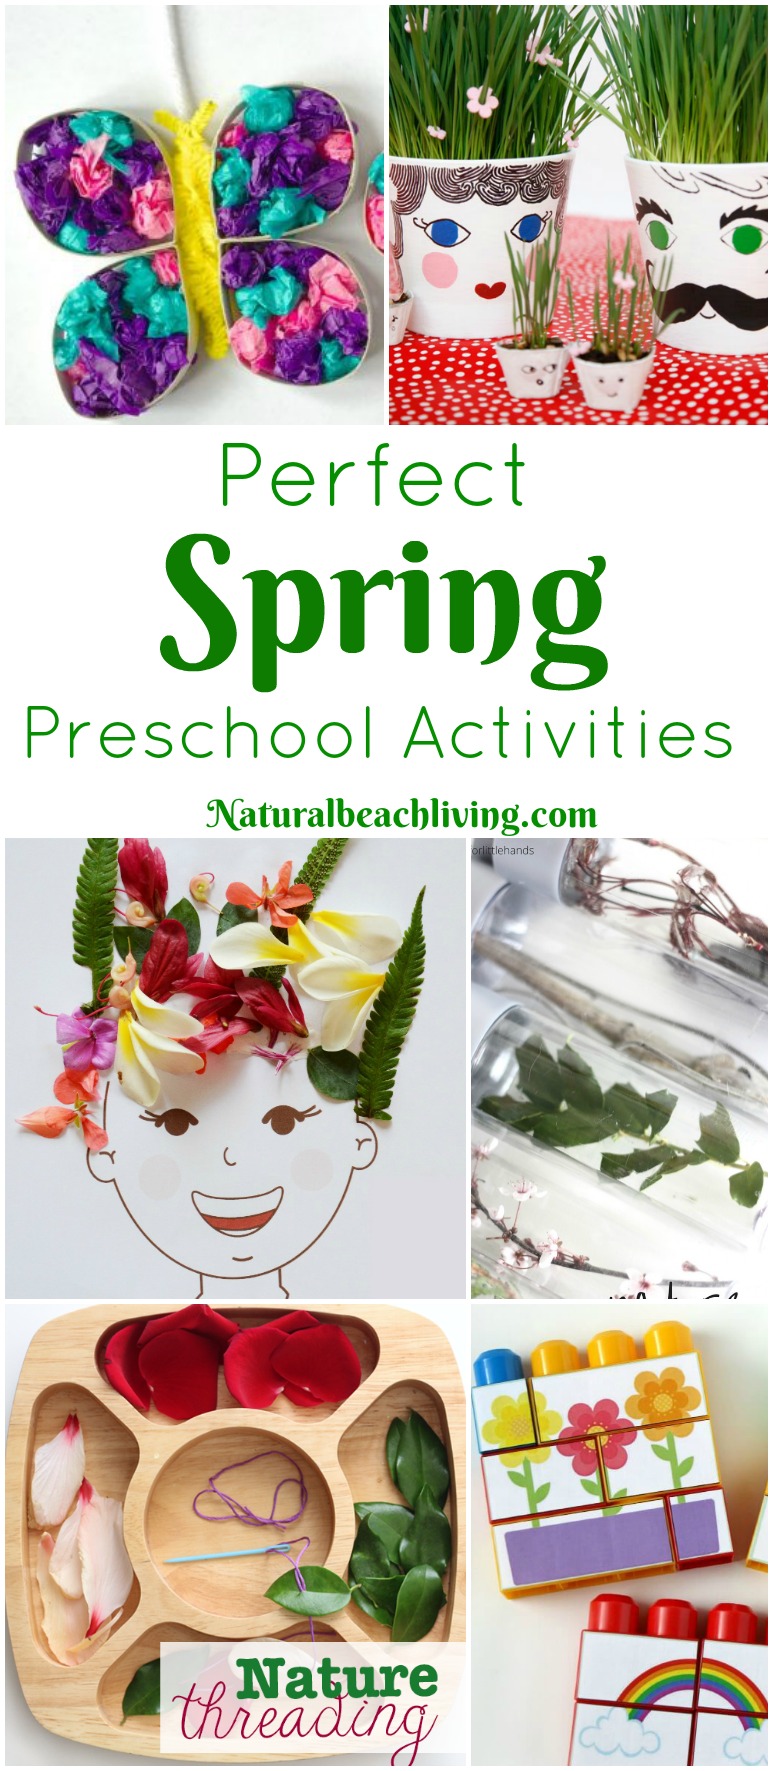 45+ Perfect Spring Preschool Activities, flowers, seeds, gardens, art, colors, Science, Nature ideas and more